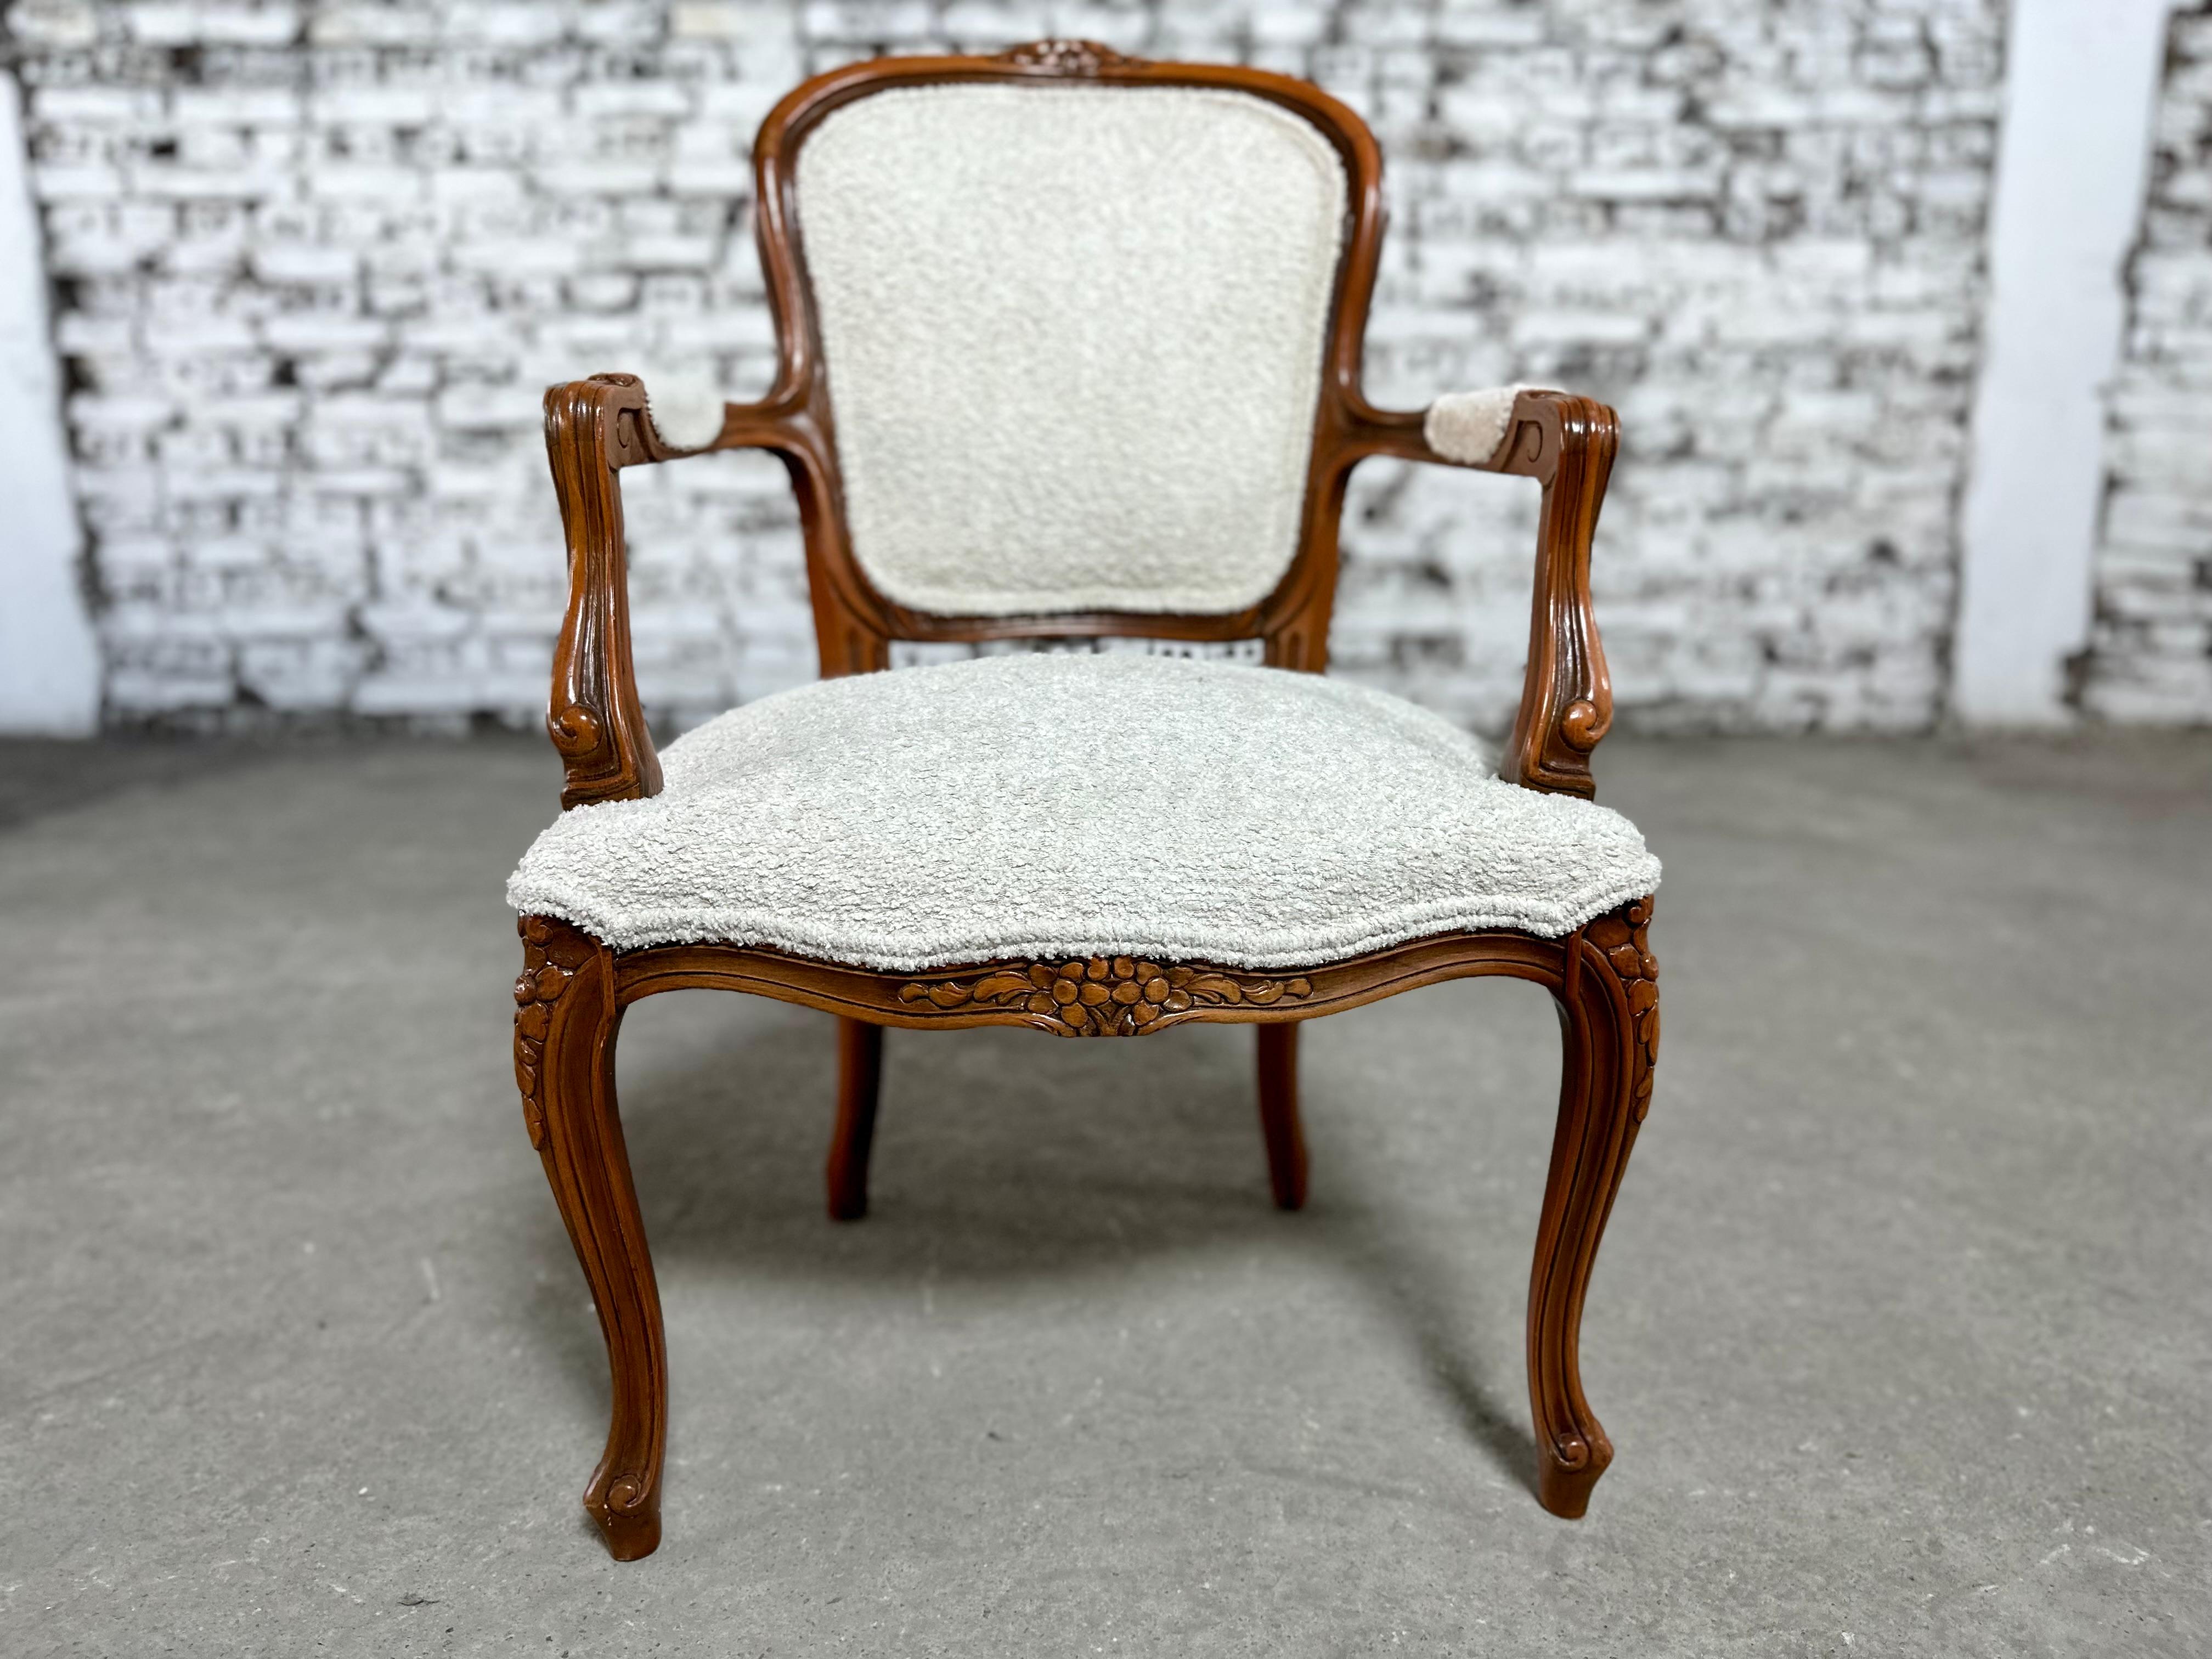 20th Century Reupholstered French Louis XV Style Oak Armchairs - a Pair